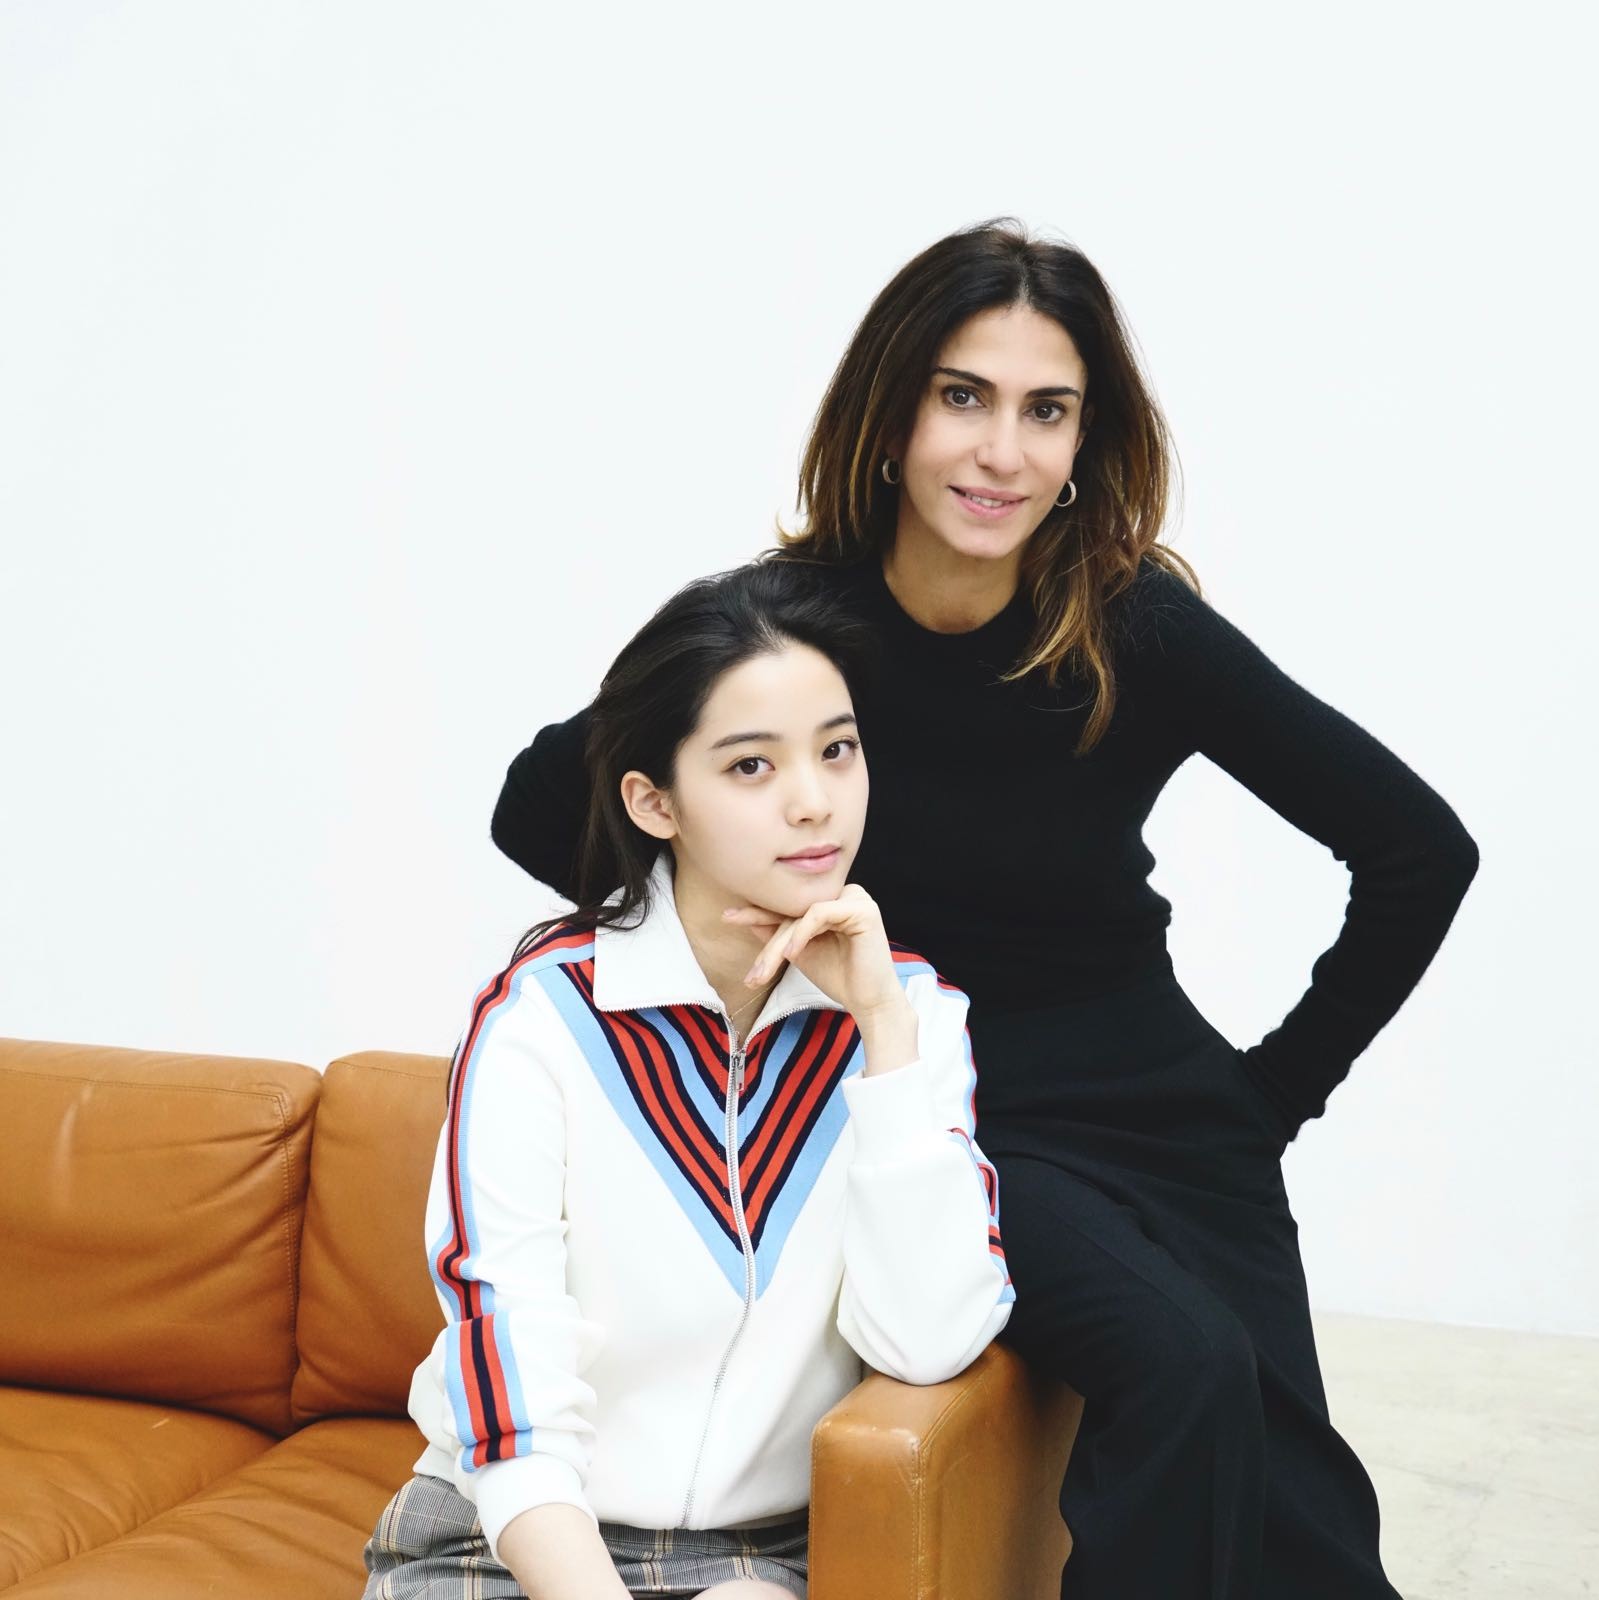 Founder of French label Maje, Judith Milgrom, with influencer Nana Ou-yang, who is the face of the brand’s 20th anniversary collection.